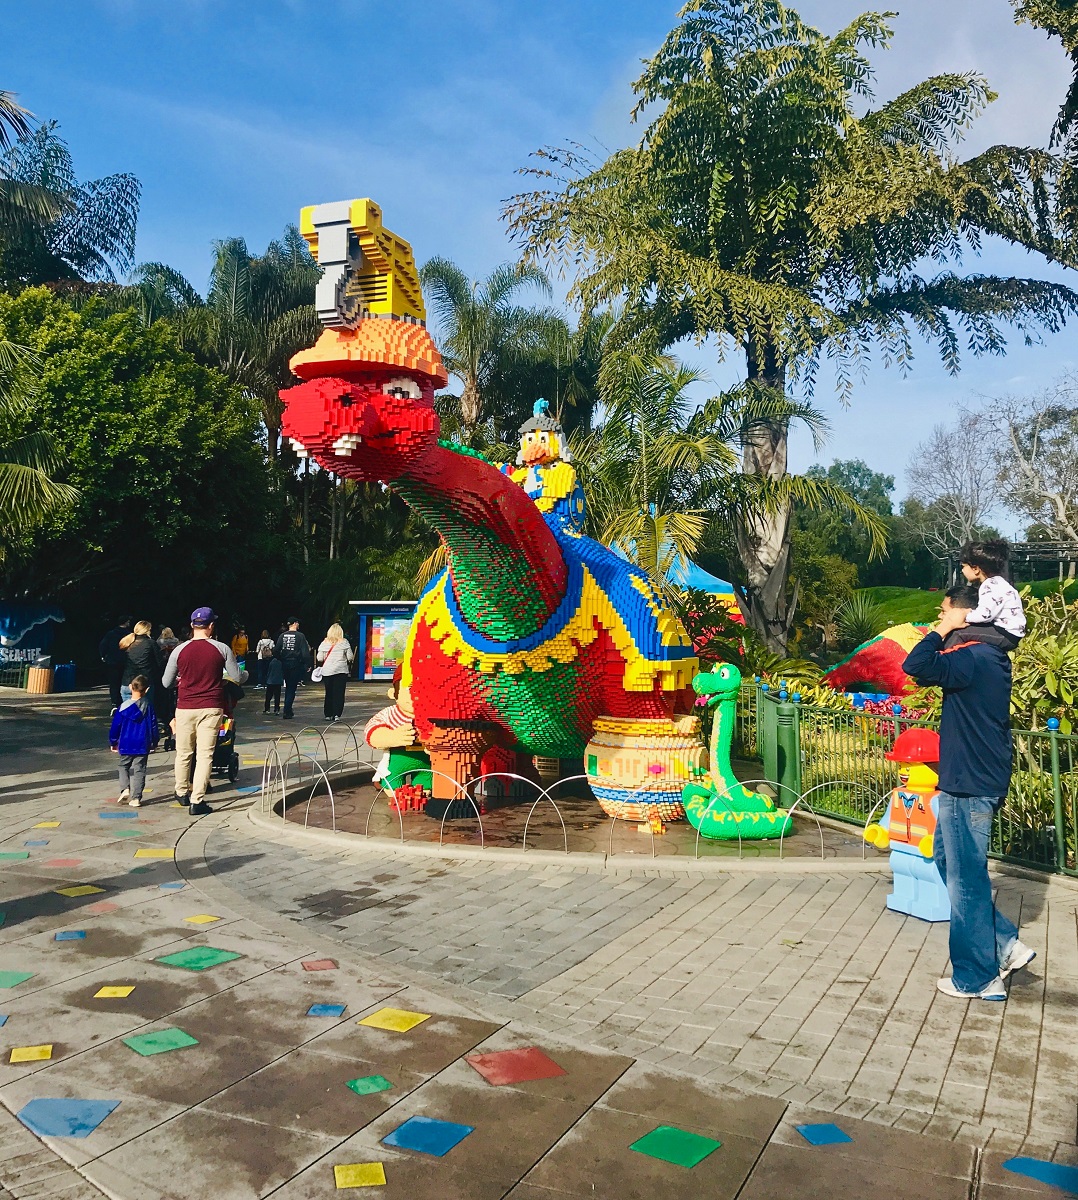 Try-Holidays-at-Legoland-For-Family-Friendly-Things-to-do-Near-Orange-Count